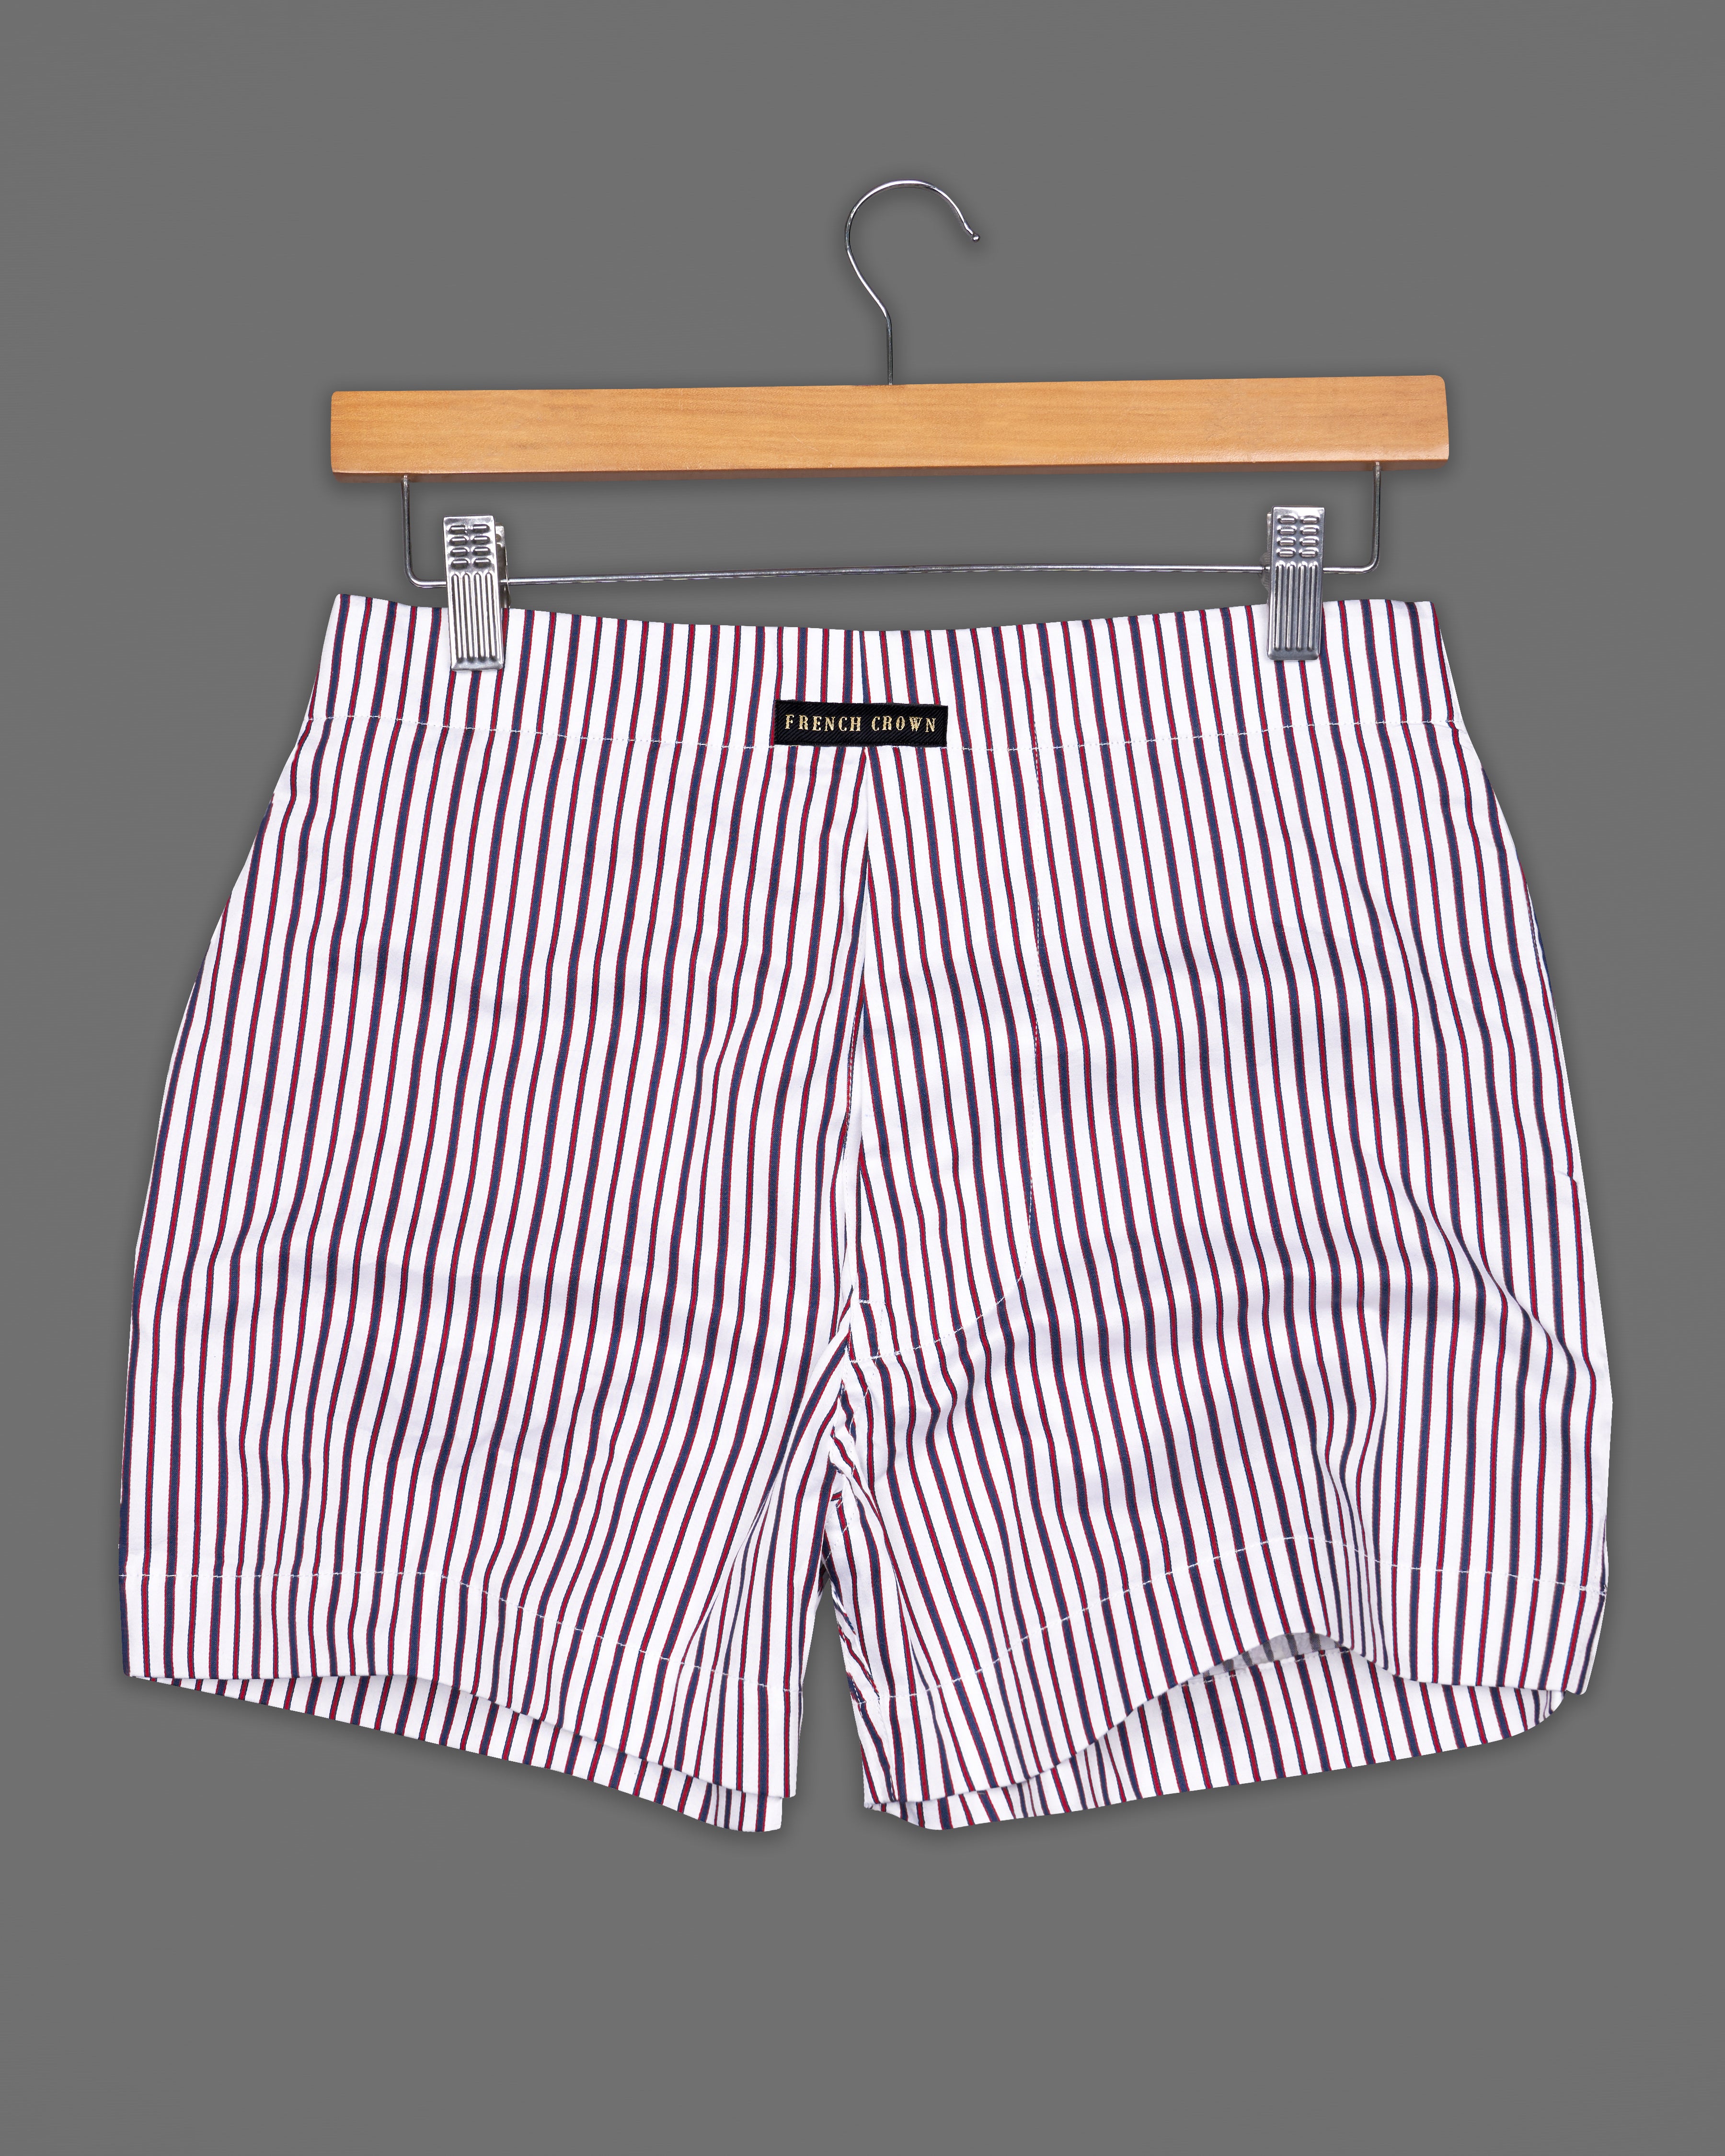 Bright White with Zodiac Blue and Crimson Red Twill Striped Premium Cotton Boxers and Baltic Navy Blue with Celeste Gray Premium Tencel Boxers Combo BX447-BX404-28, BX447-BX404-30, BX447-BX404-32, BX447-BX404-34, BX447-BX404-36, BX447-BX404-38, BX447-BX404-40, BX447-BX404-42, BX447-BX404-44